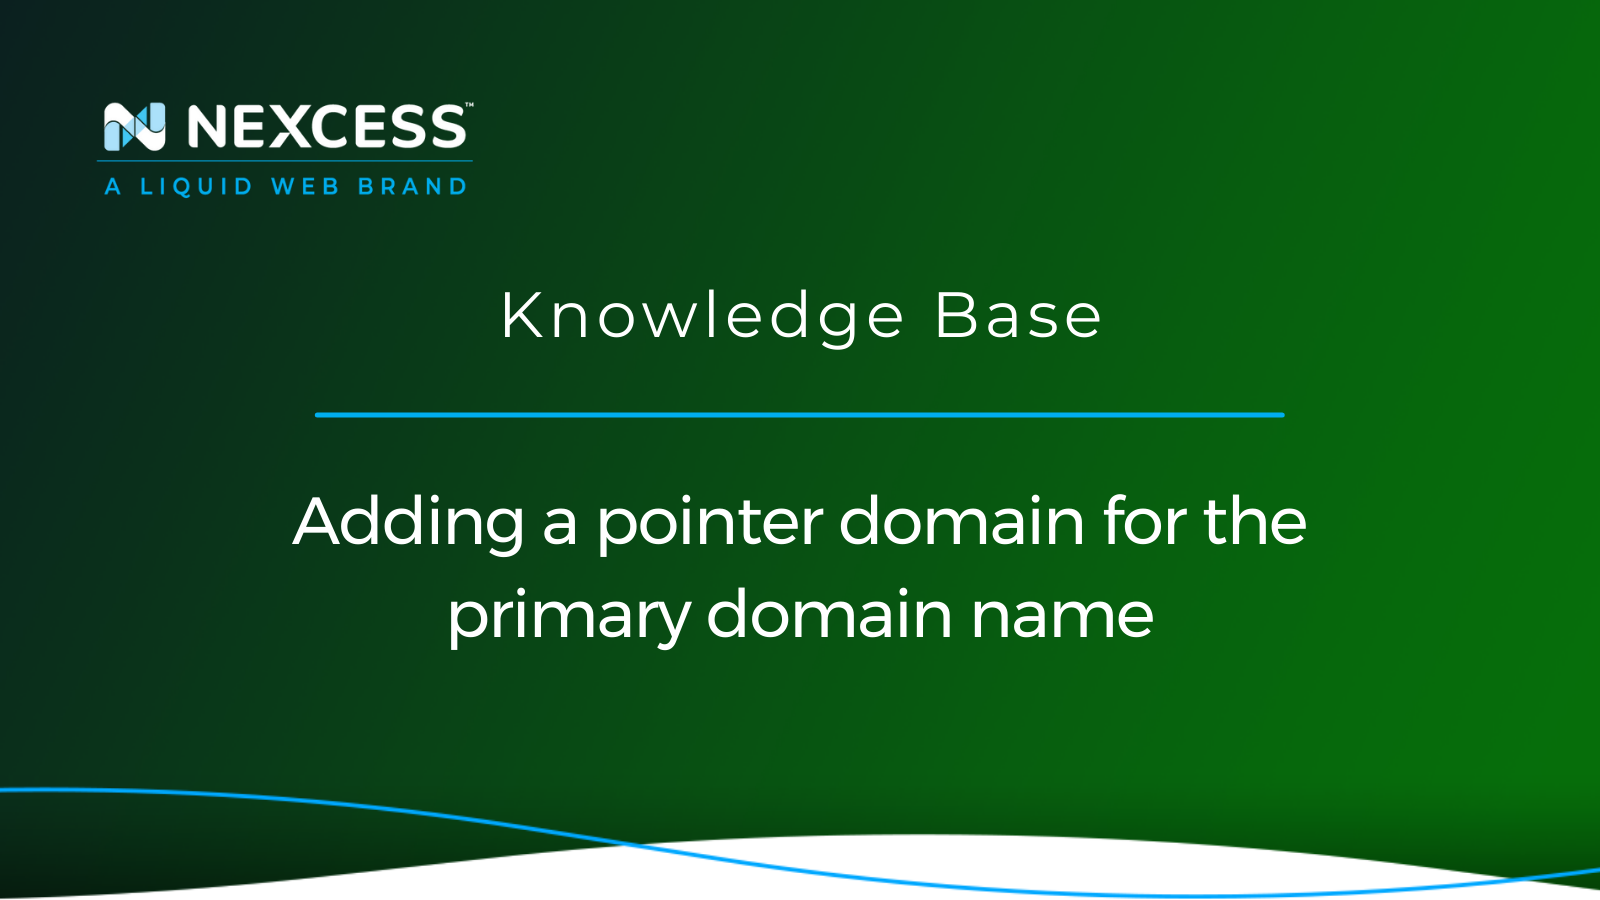 Adding a pointer domain for the primary domain name